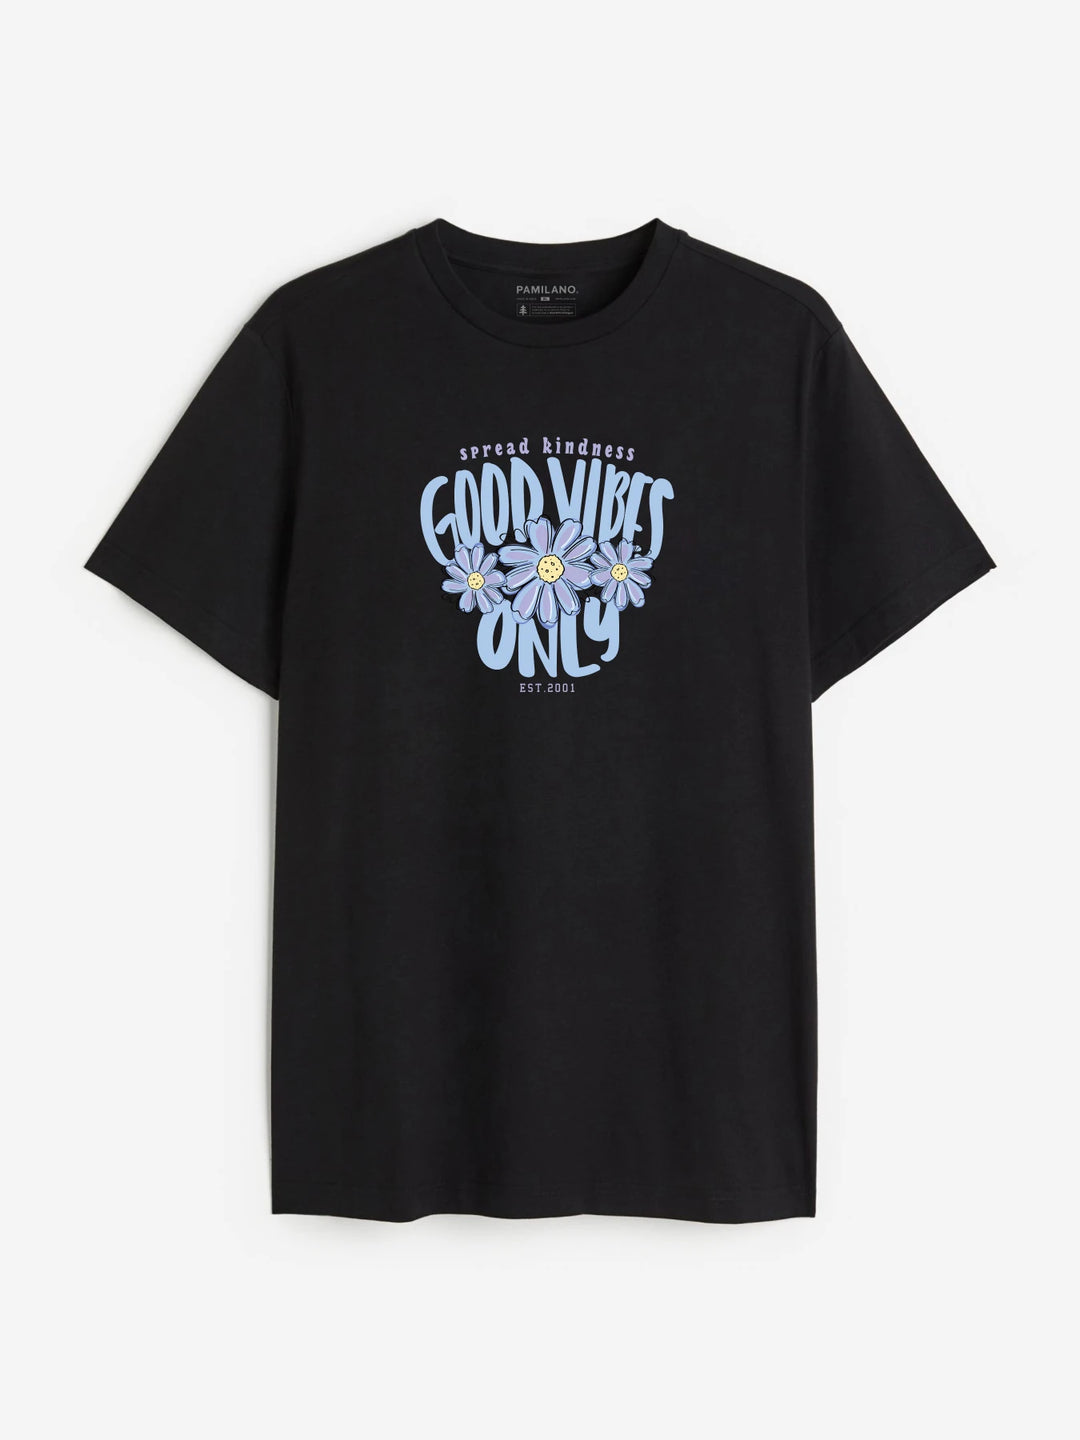 Good Vibe Only - T-Shirt